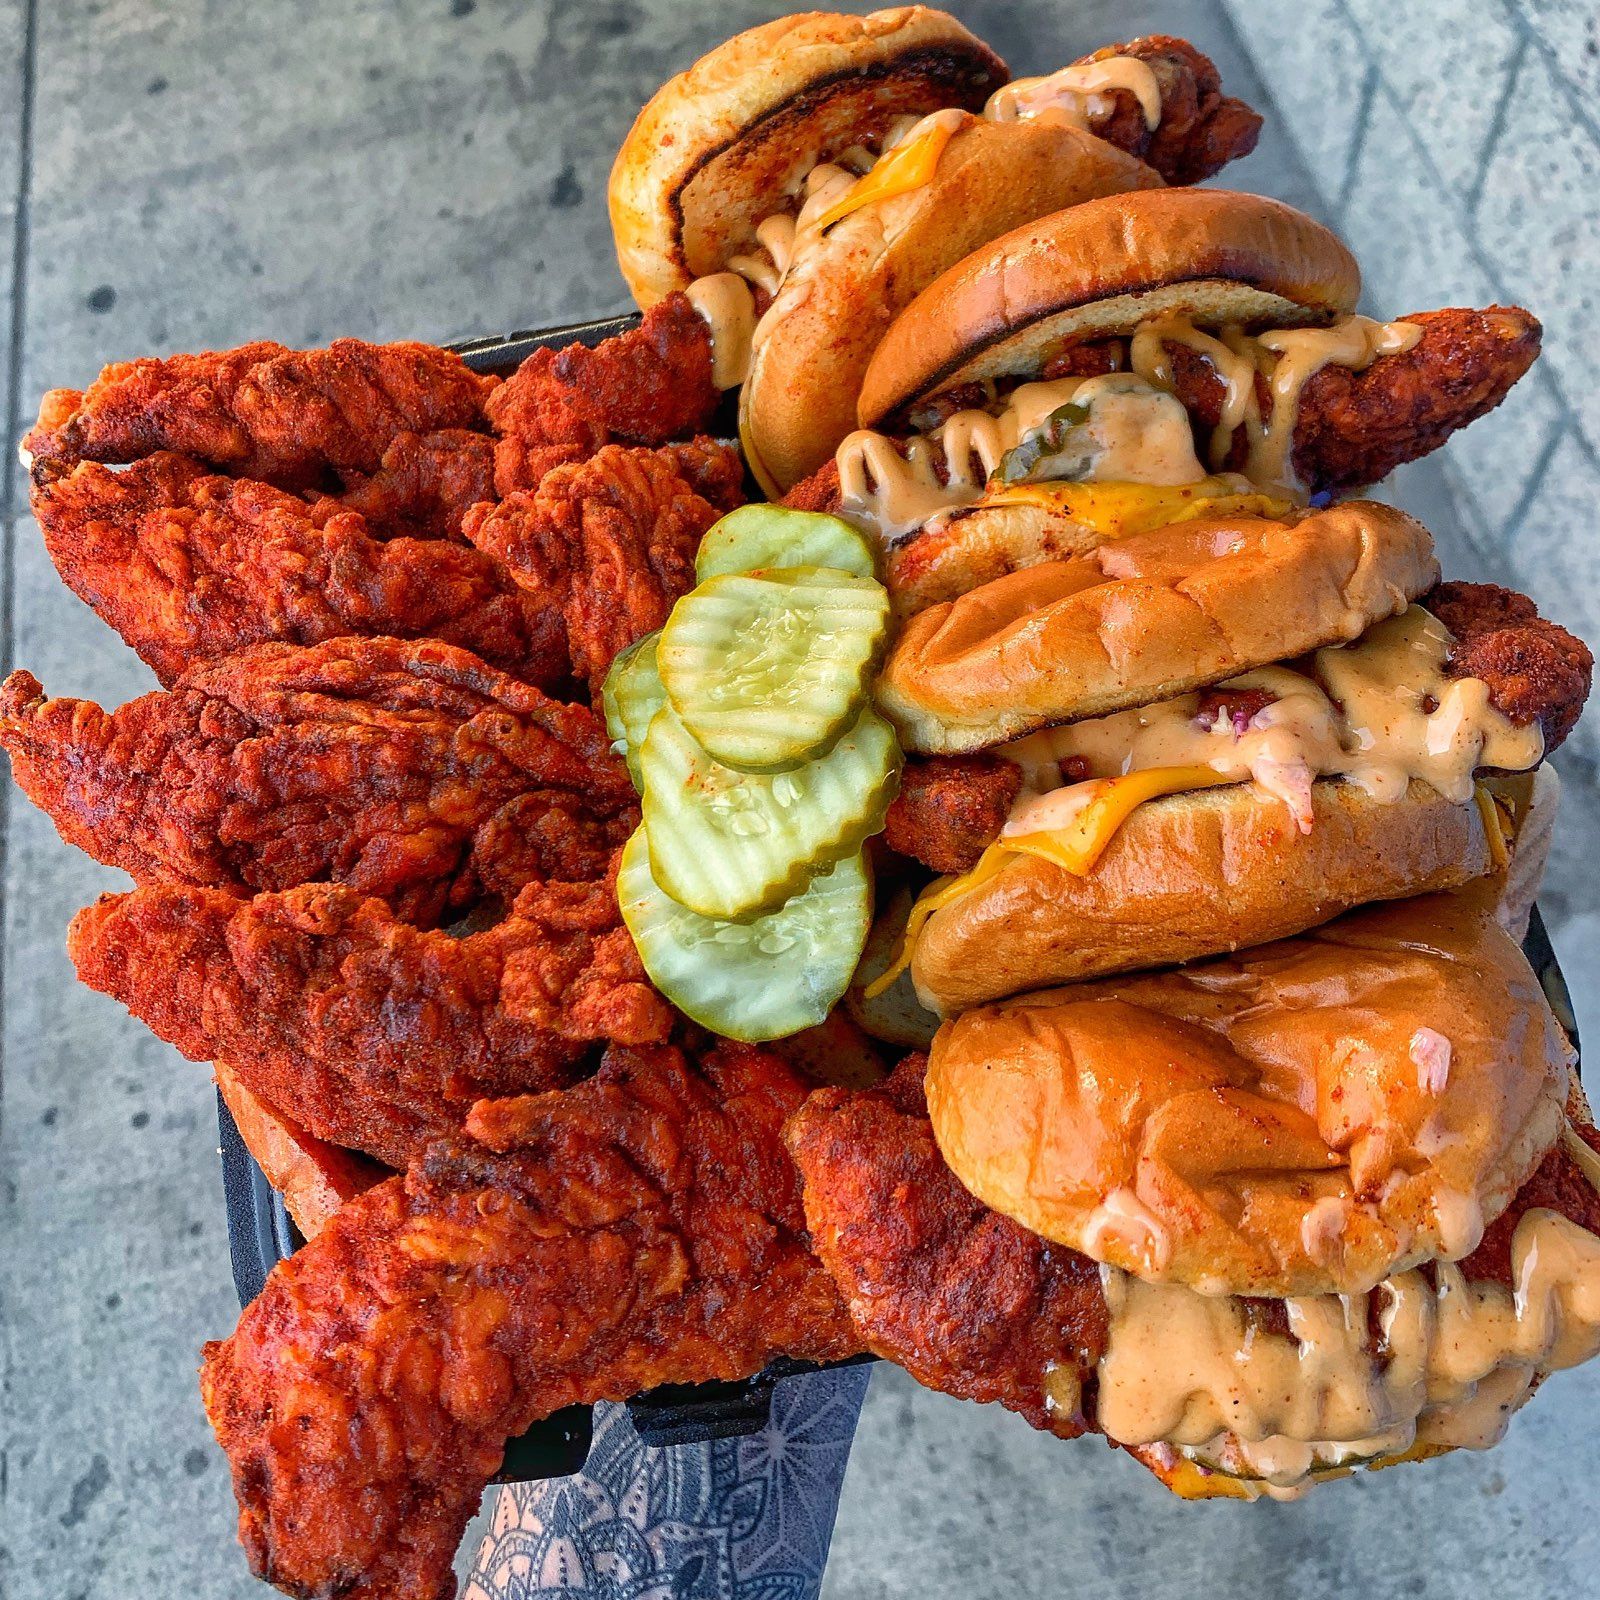 Dave's Hot Chicken Named America's Fastest-Growing Restaurant